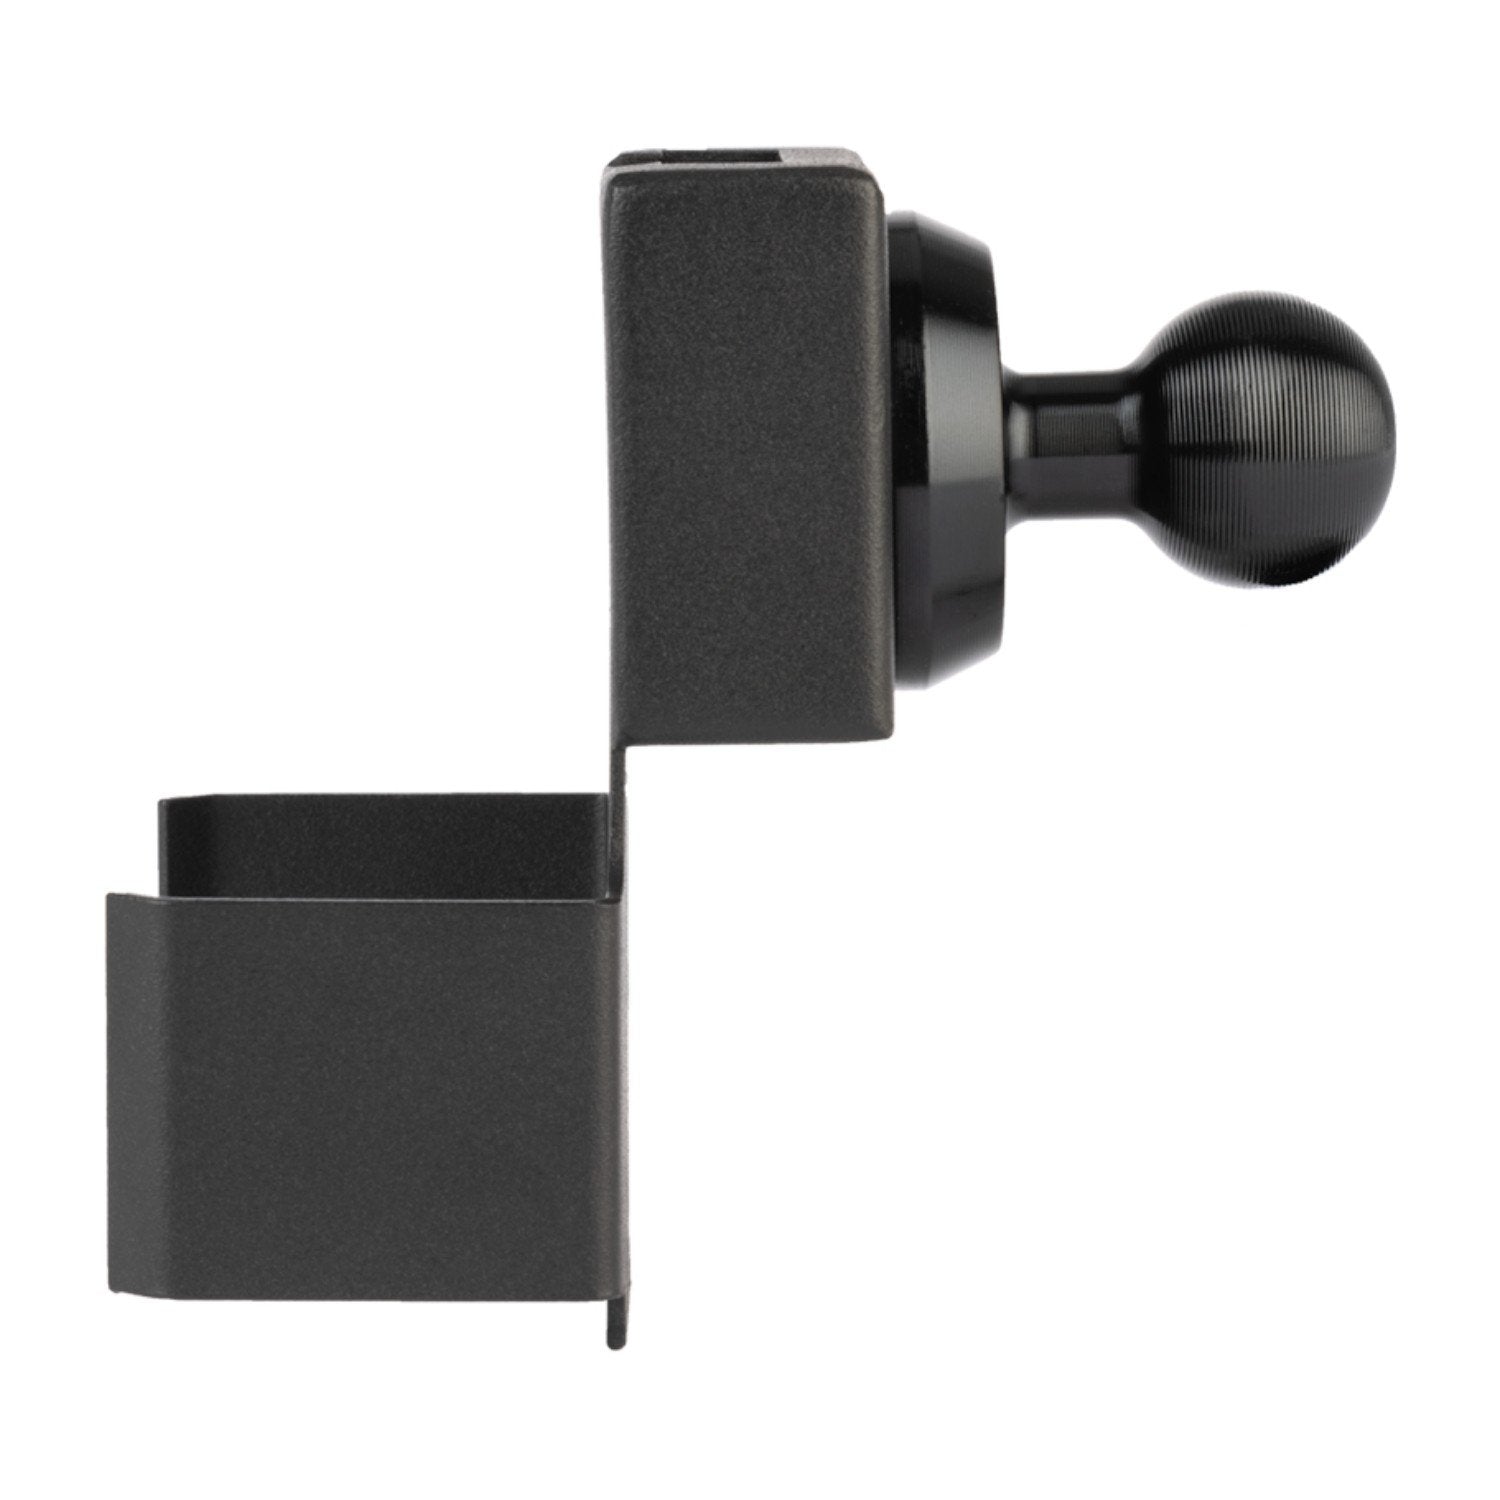 BULLET POINT RADIO HOLDER WITH 20MM BALL FOR JEEP WRANGLER